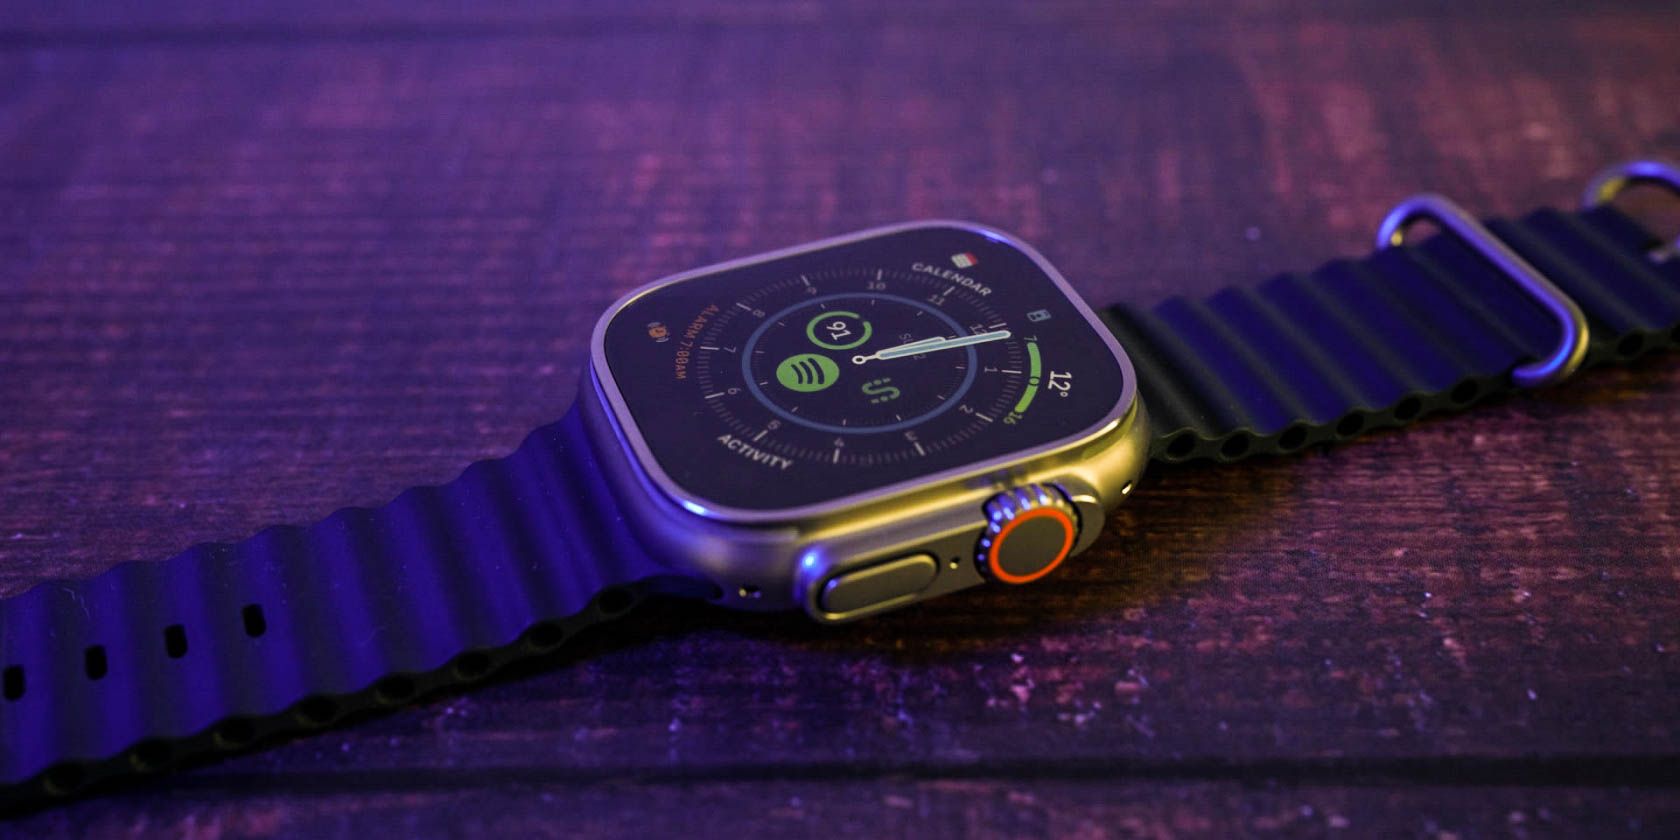 8 Things the Apple Watch Can Do Without Your iPhone Nearby